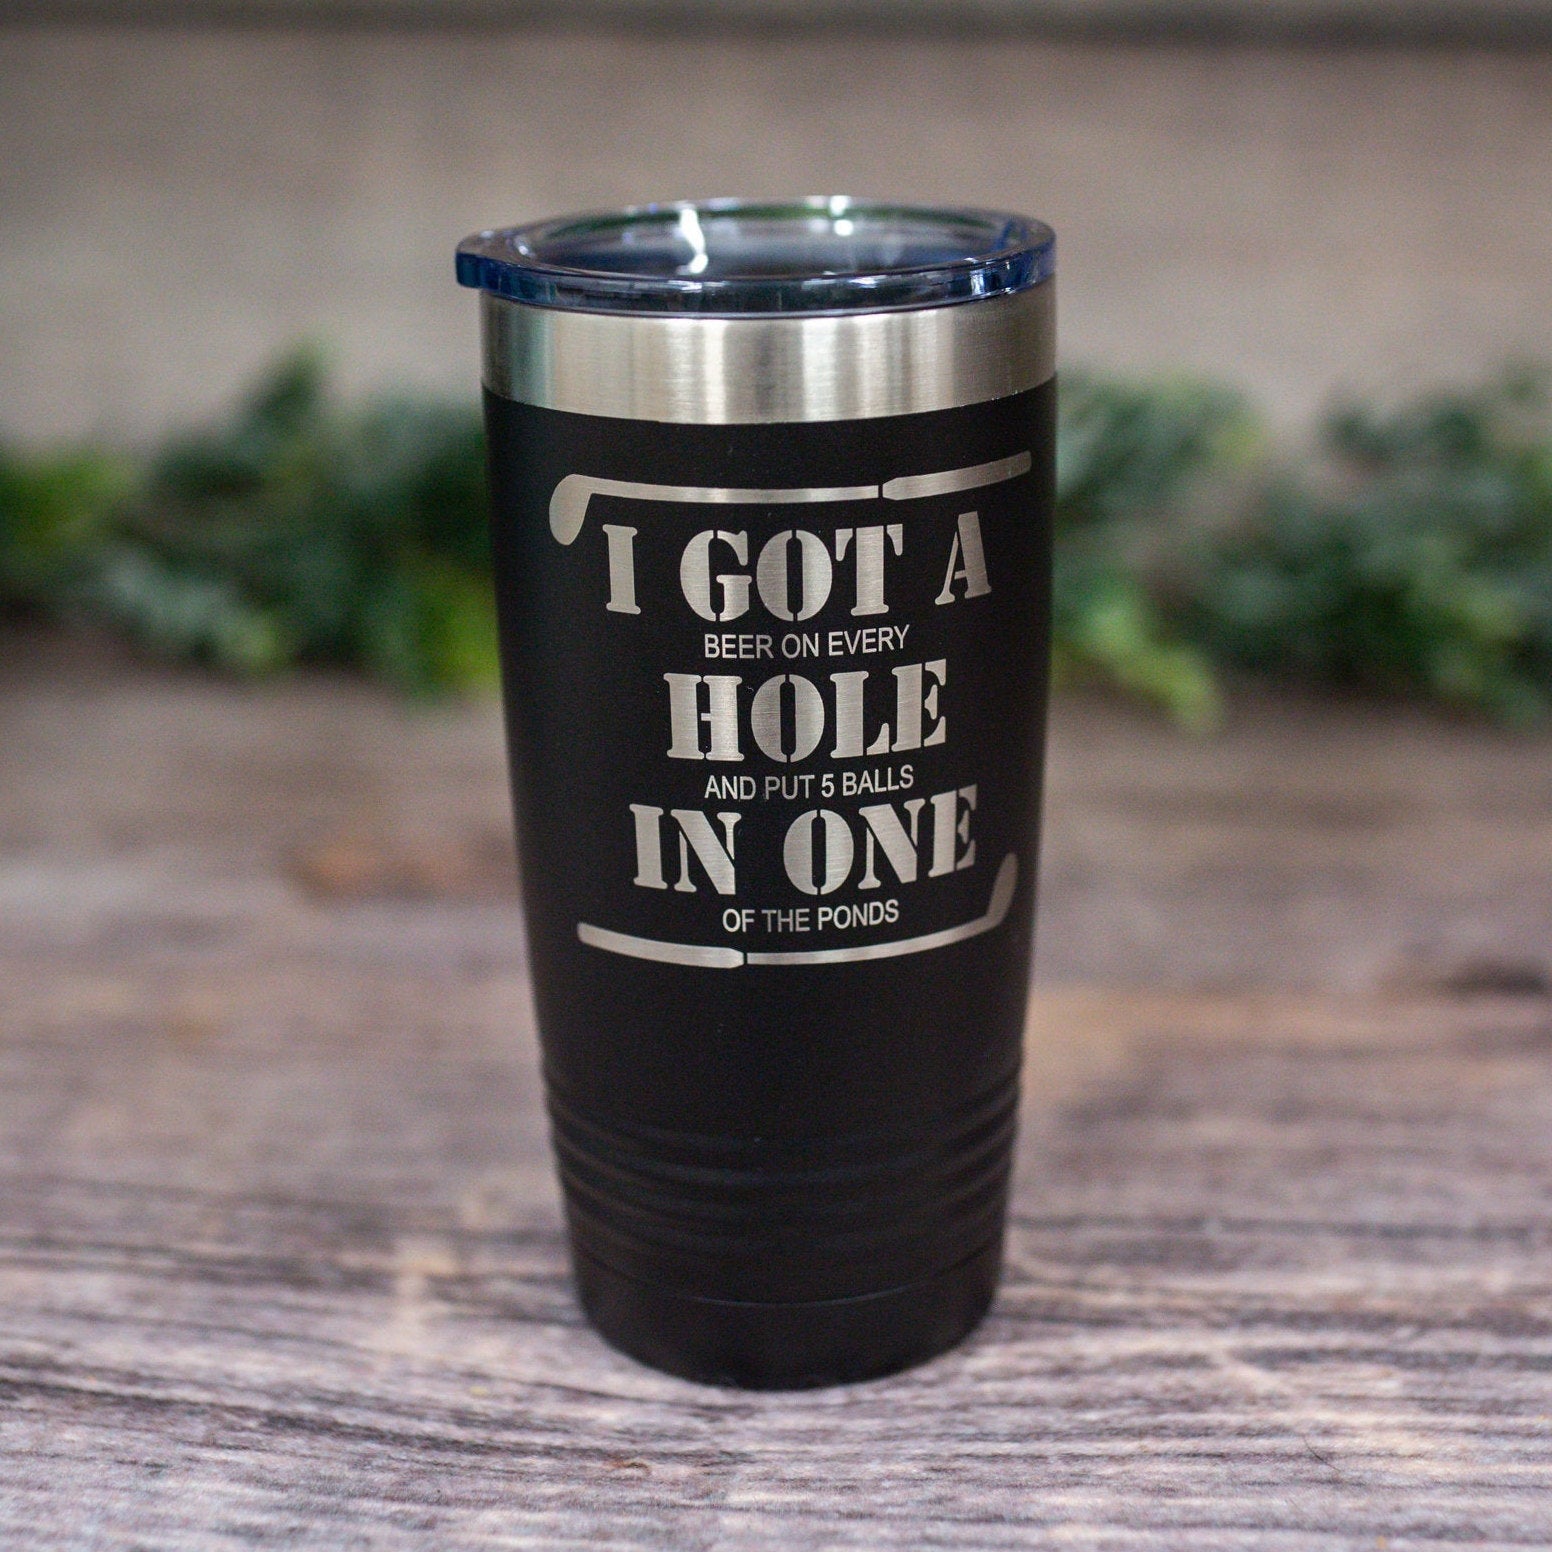 https://3cetching.com/wp-content/uploads/2021/07/i-got-a-hole-in-one-engraved-stainless-steel-tumbler-travel-mug-funny-golfing-mug-60f726d2.jpg